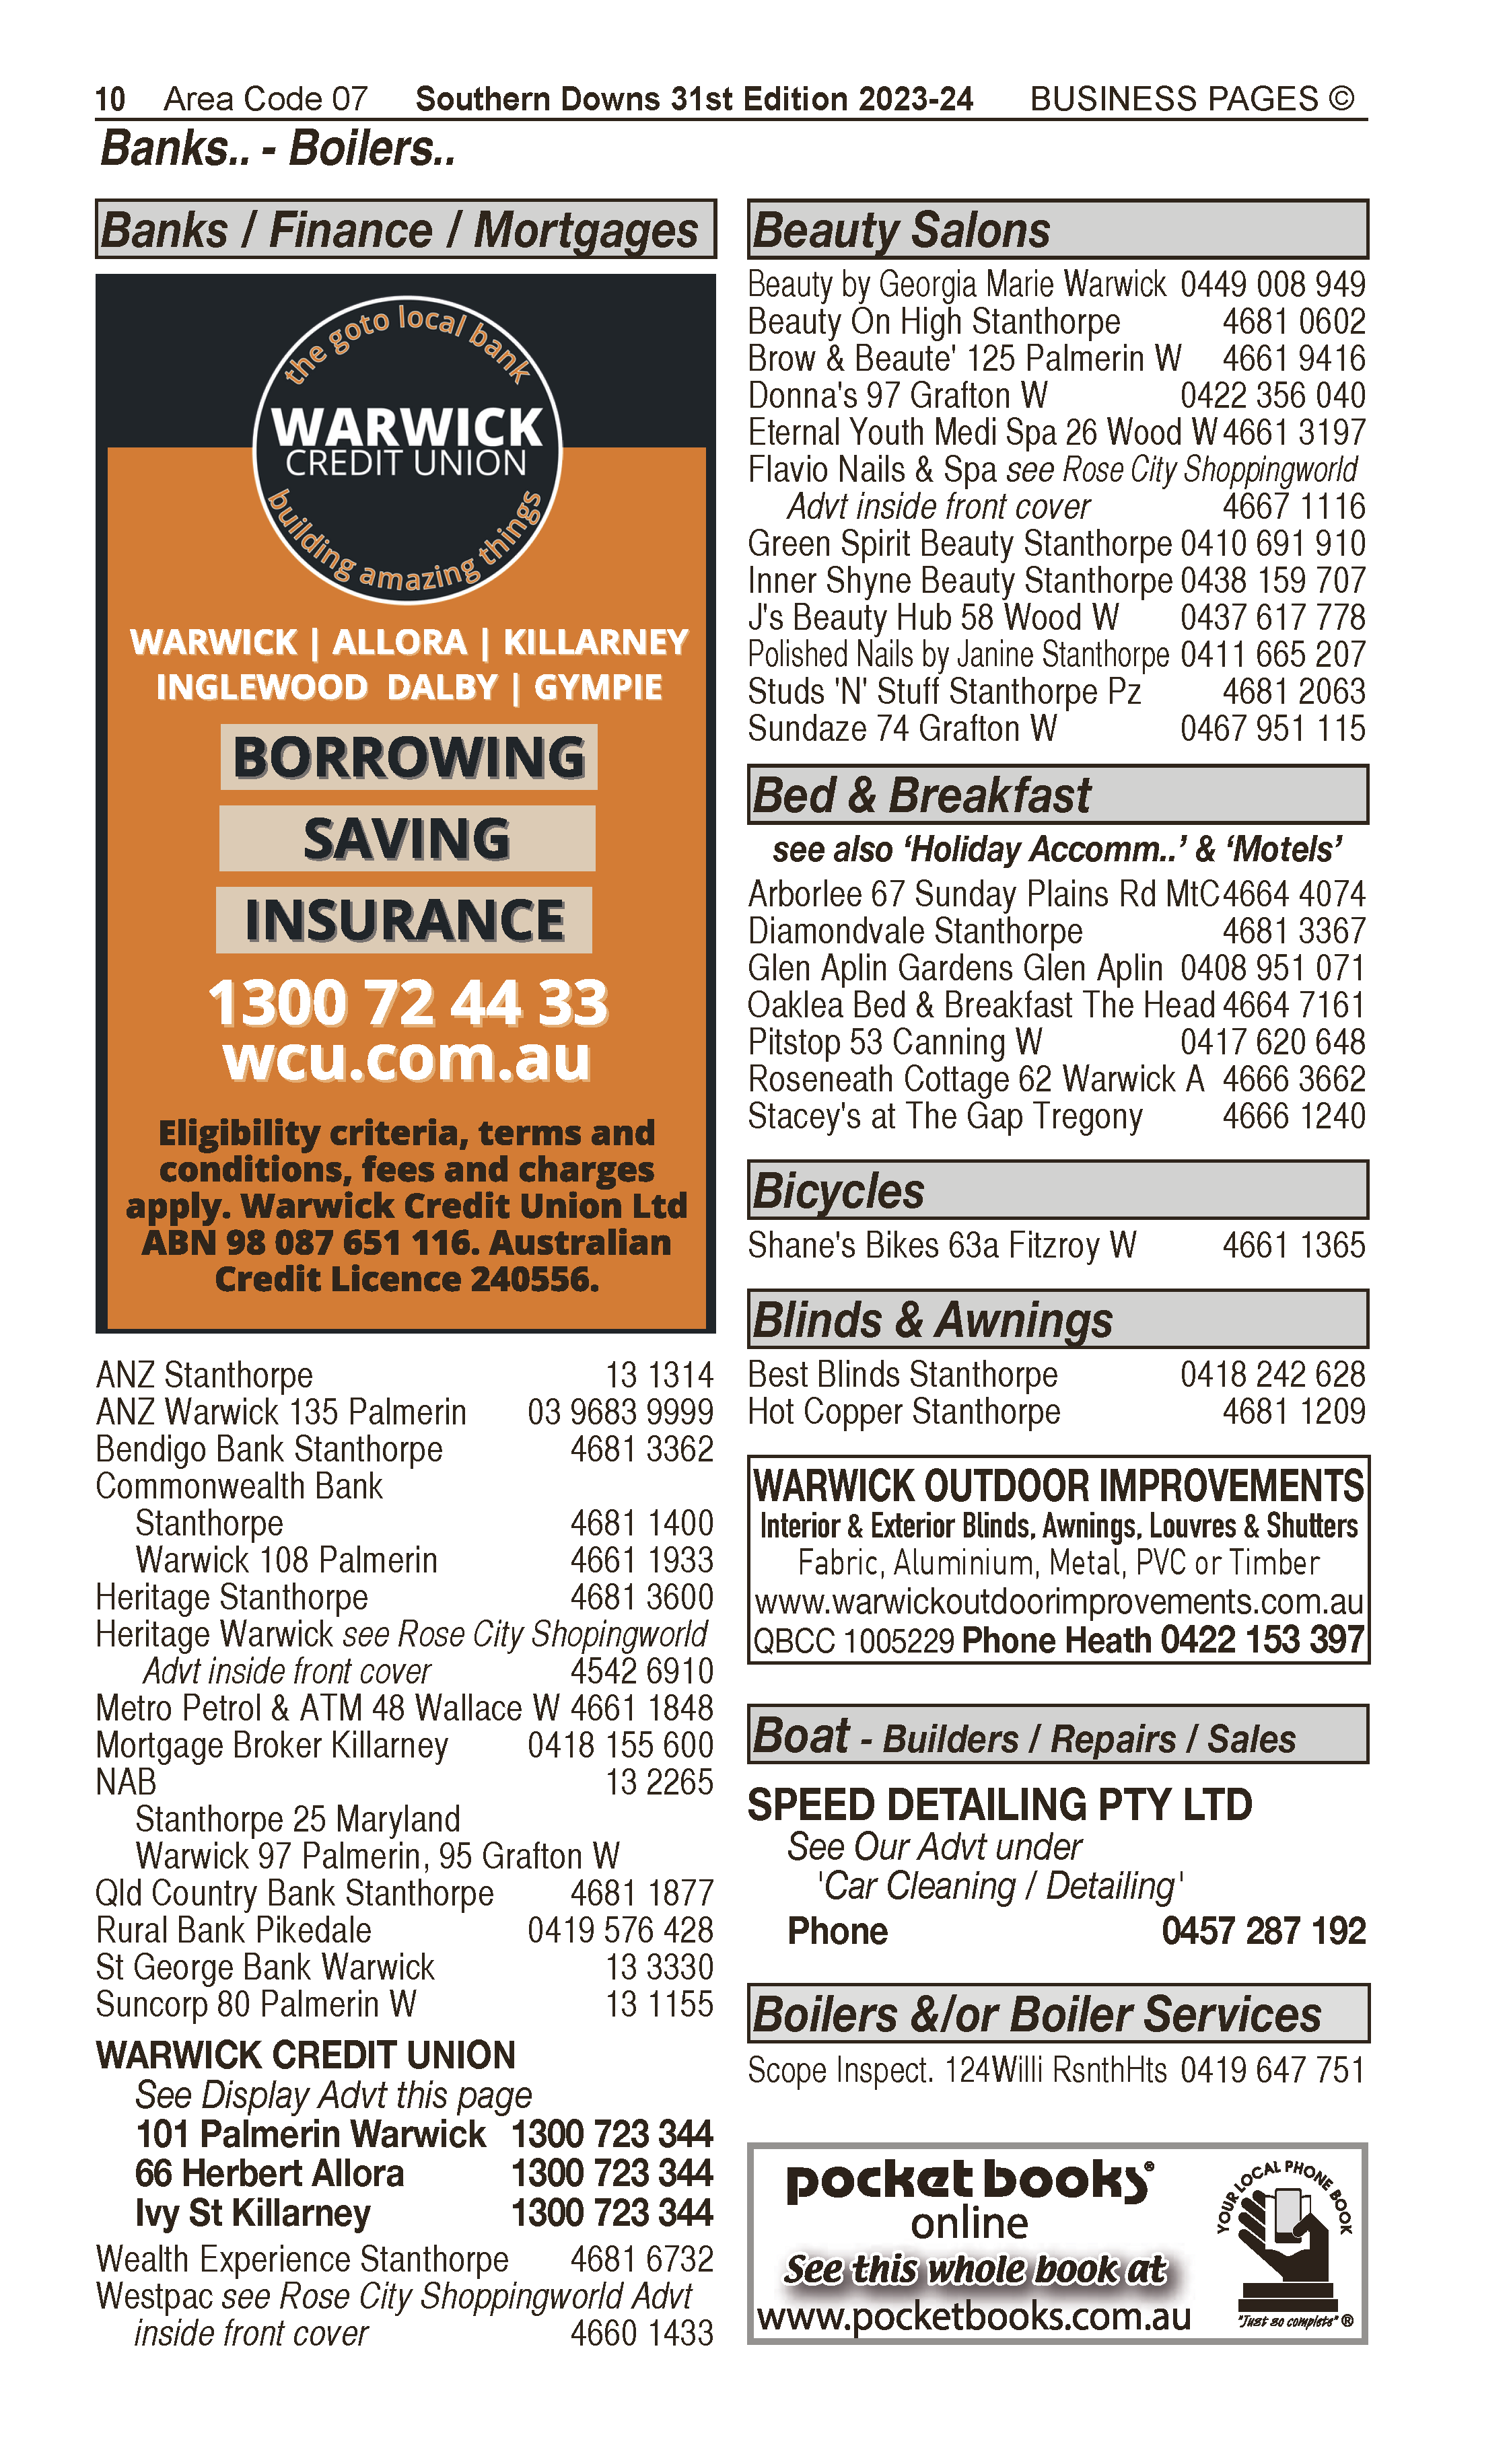 Speed Detailing Pty Ltd | Agricultural – Machinery & Services in Warwick | PBezy Pocket Books local directories - page 10